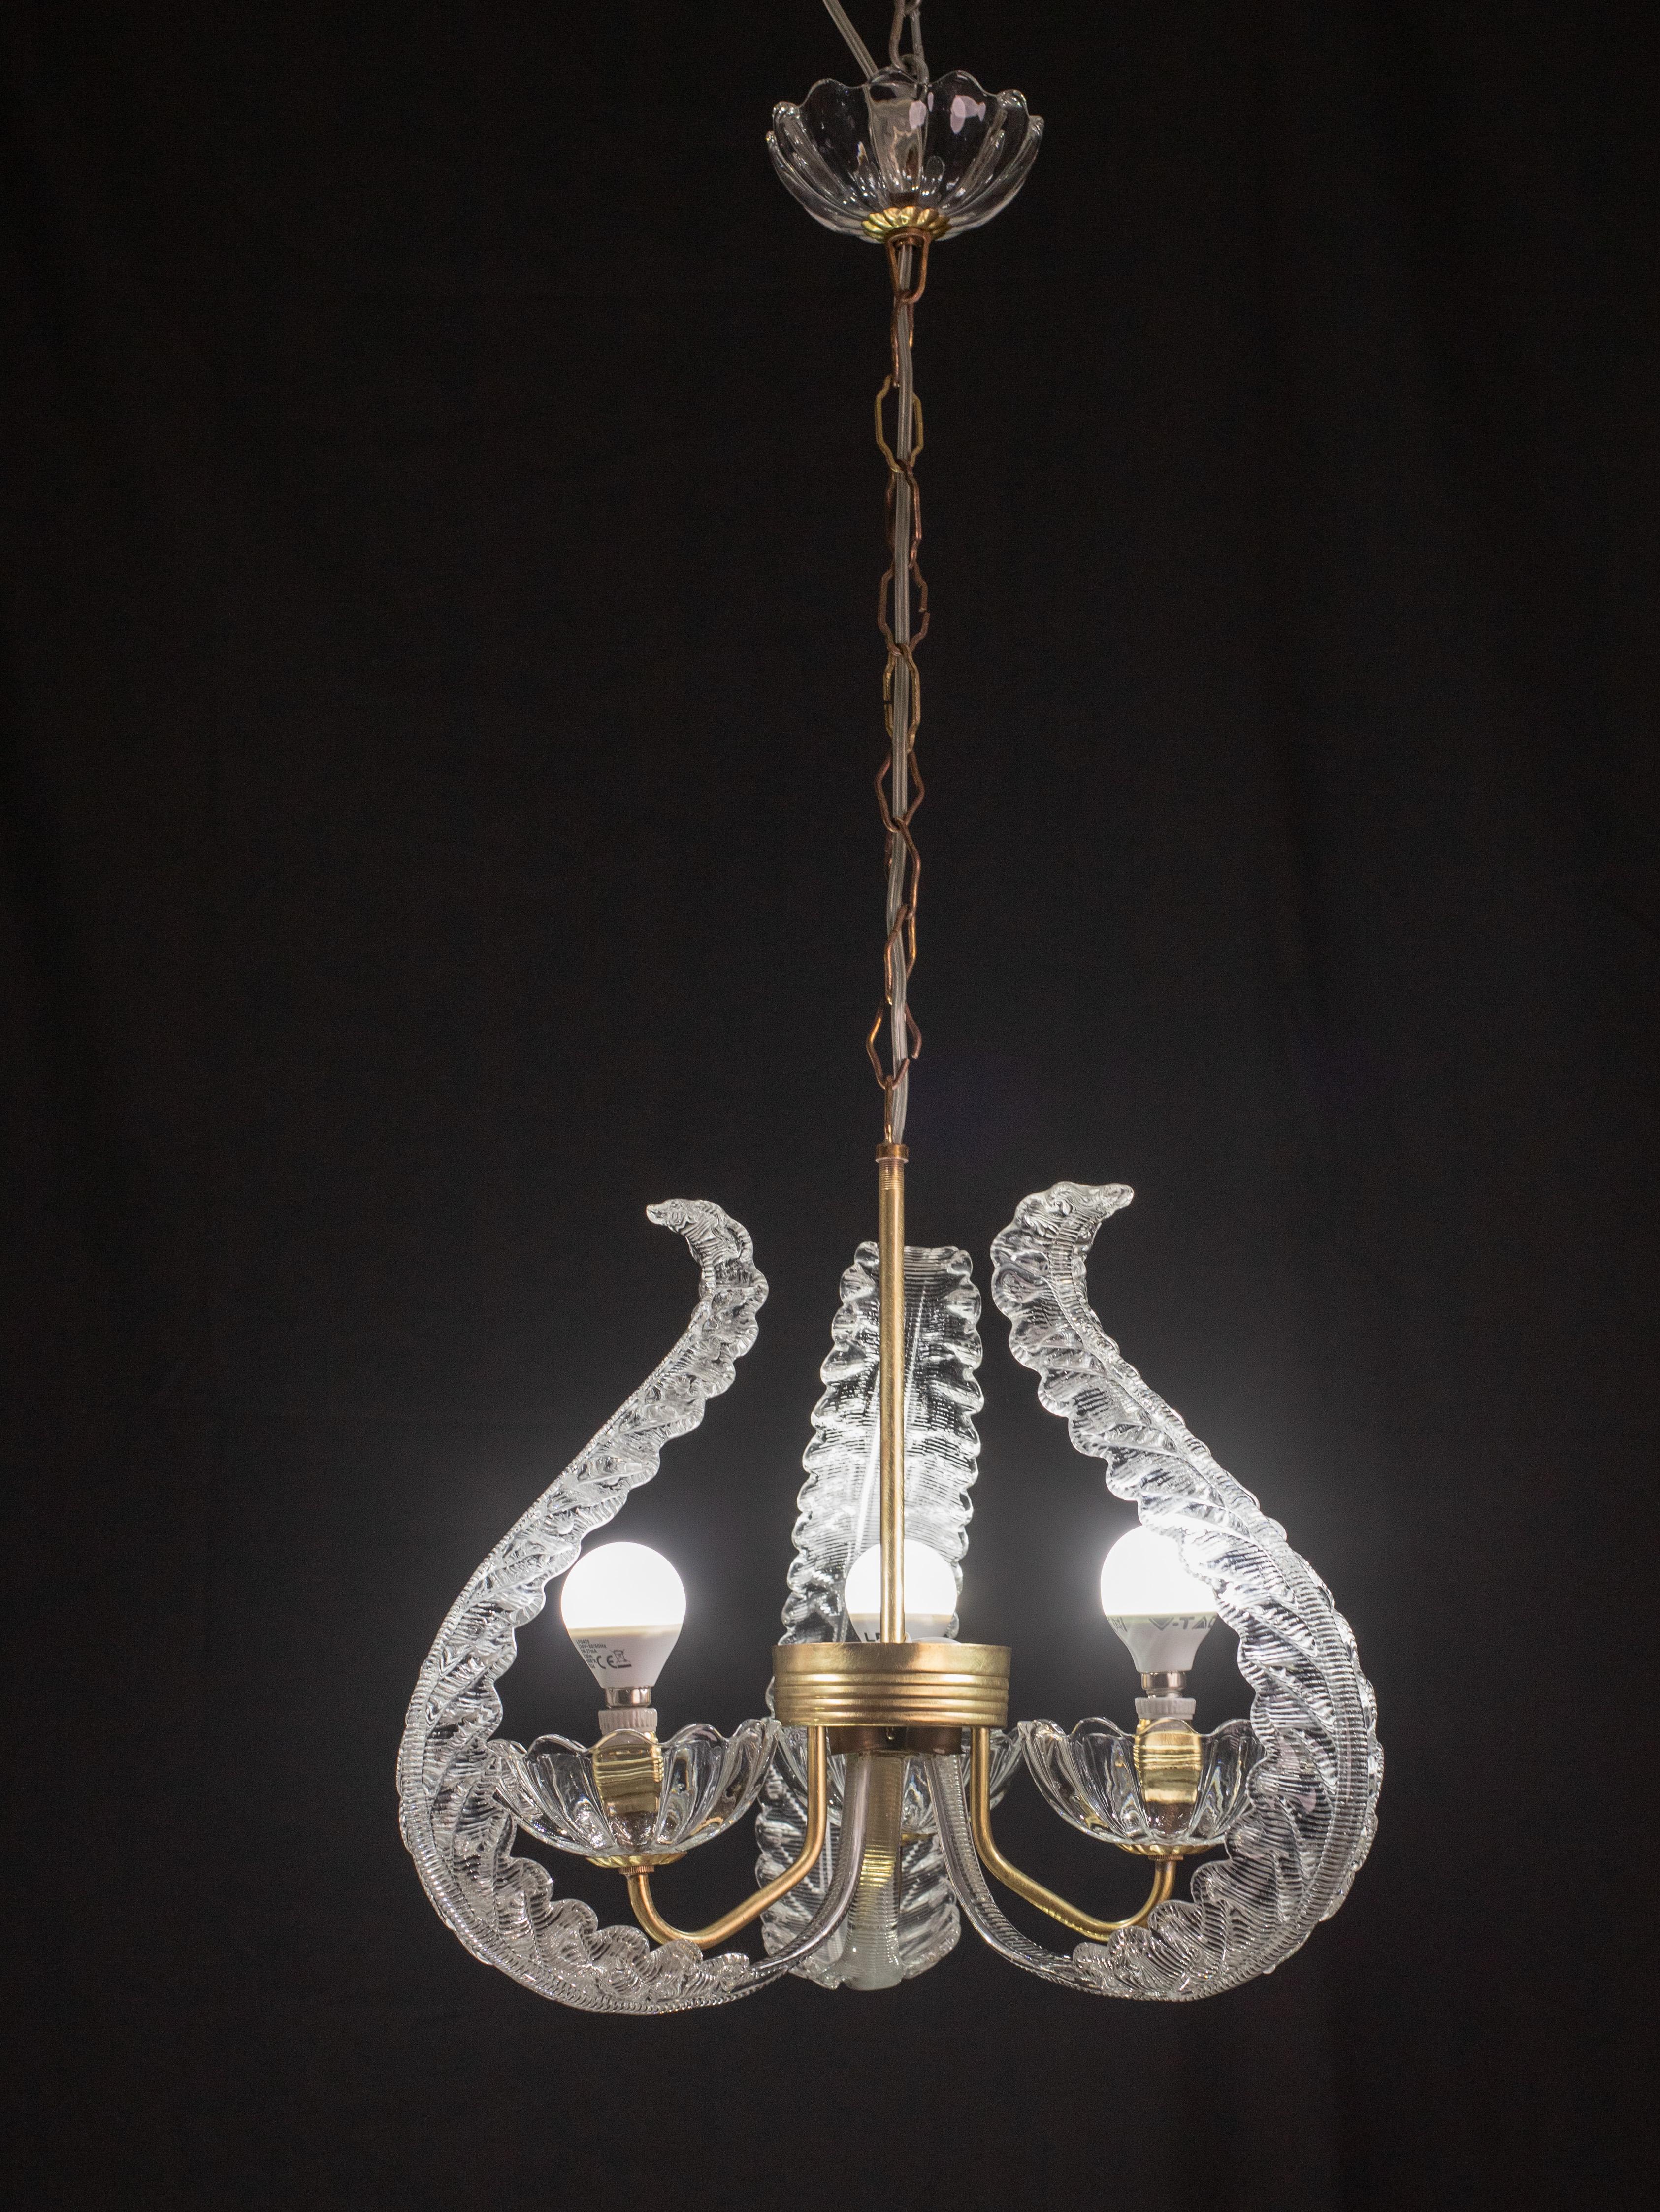 Pretty Murano chandelier attributed to Ercole Barovier special for decorating any kind of space.

The chandelier consists of 3 cups with three light points (e14) embellished with three large leaves,. there is also a glass rosette.

The light